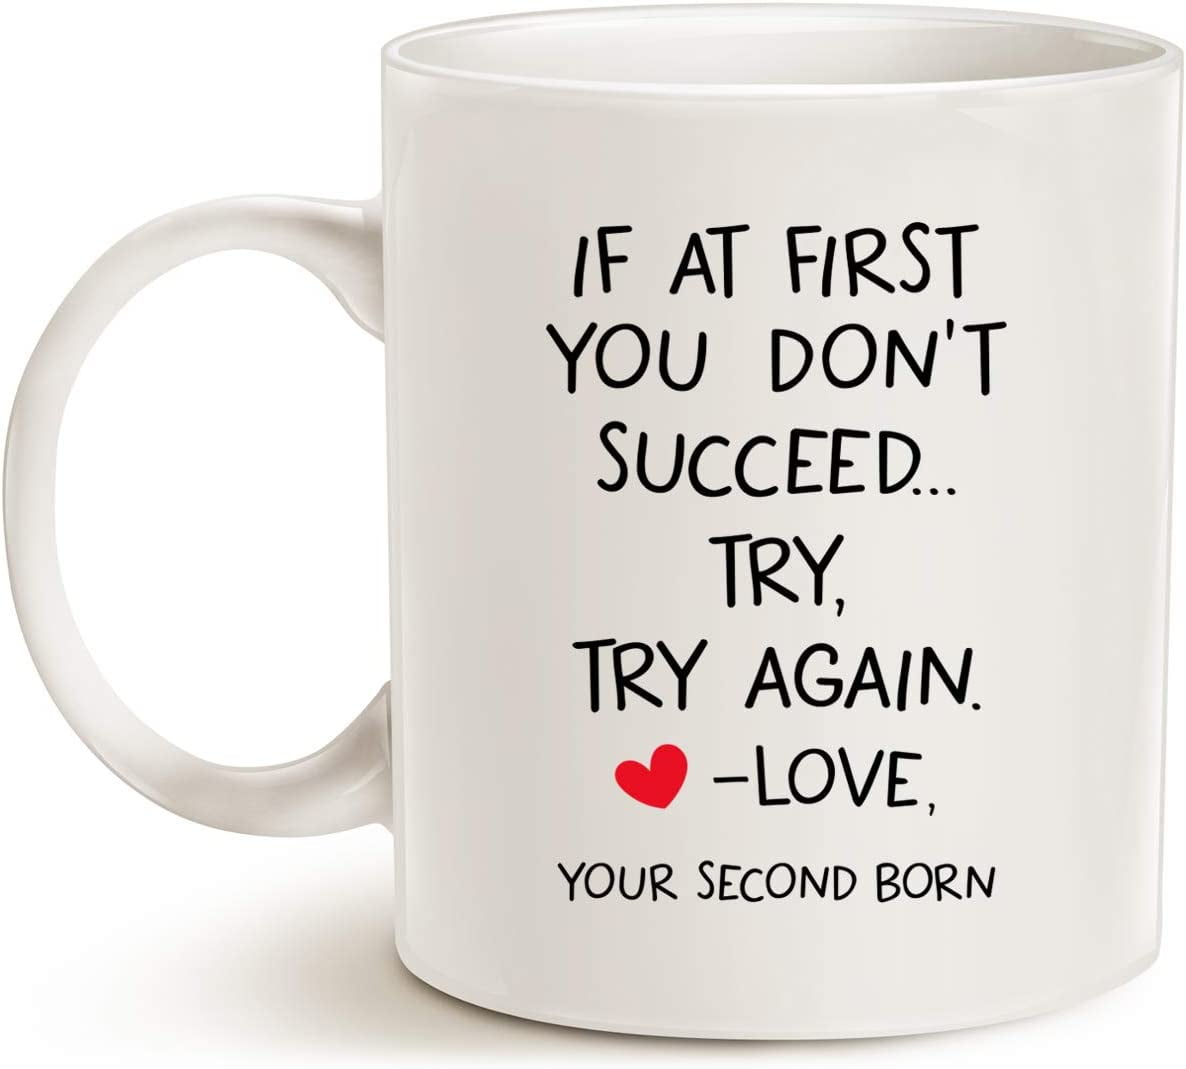 Installing Muscles Coffee Mug or Cup, Fitness or Gym Mug or Cup Gift –  Coffee Mugs Never Lie